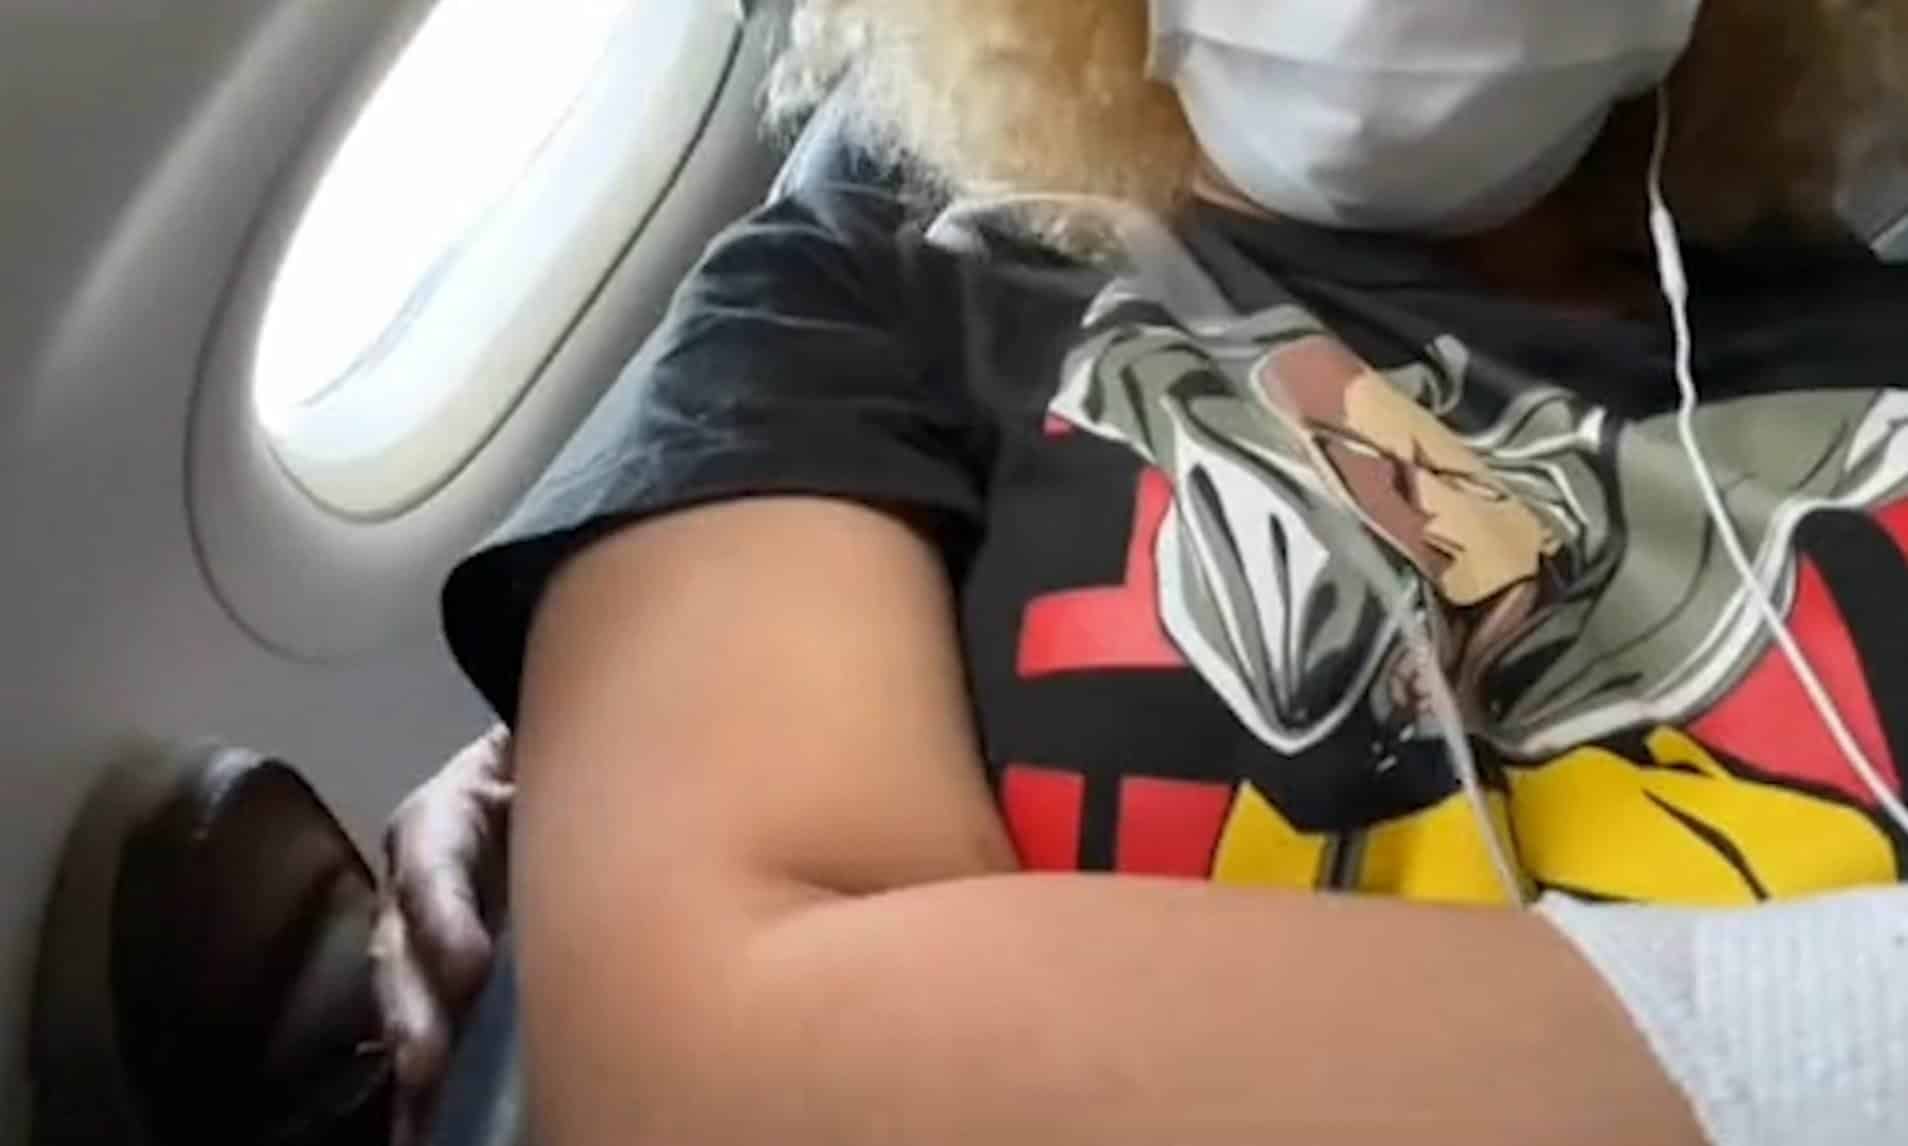 woman groped on spirit airlines